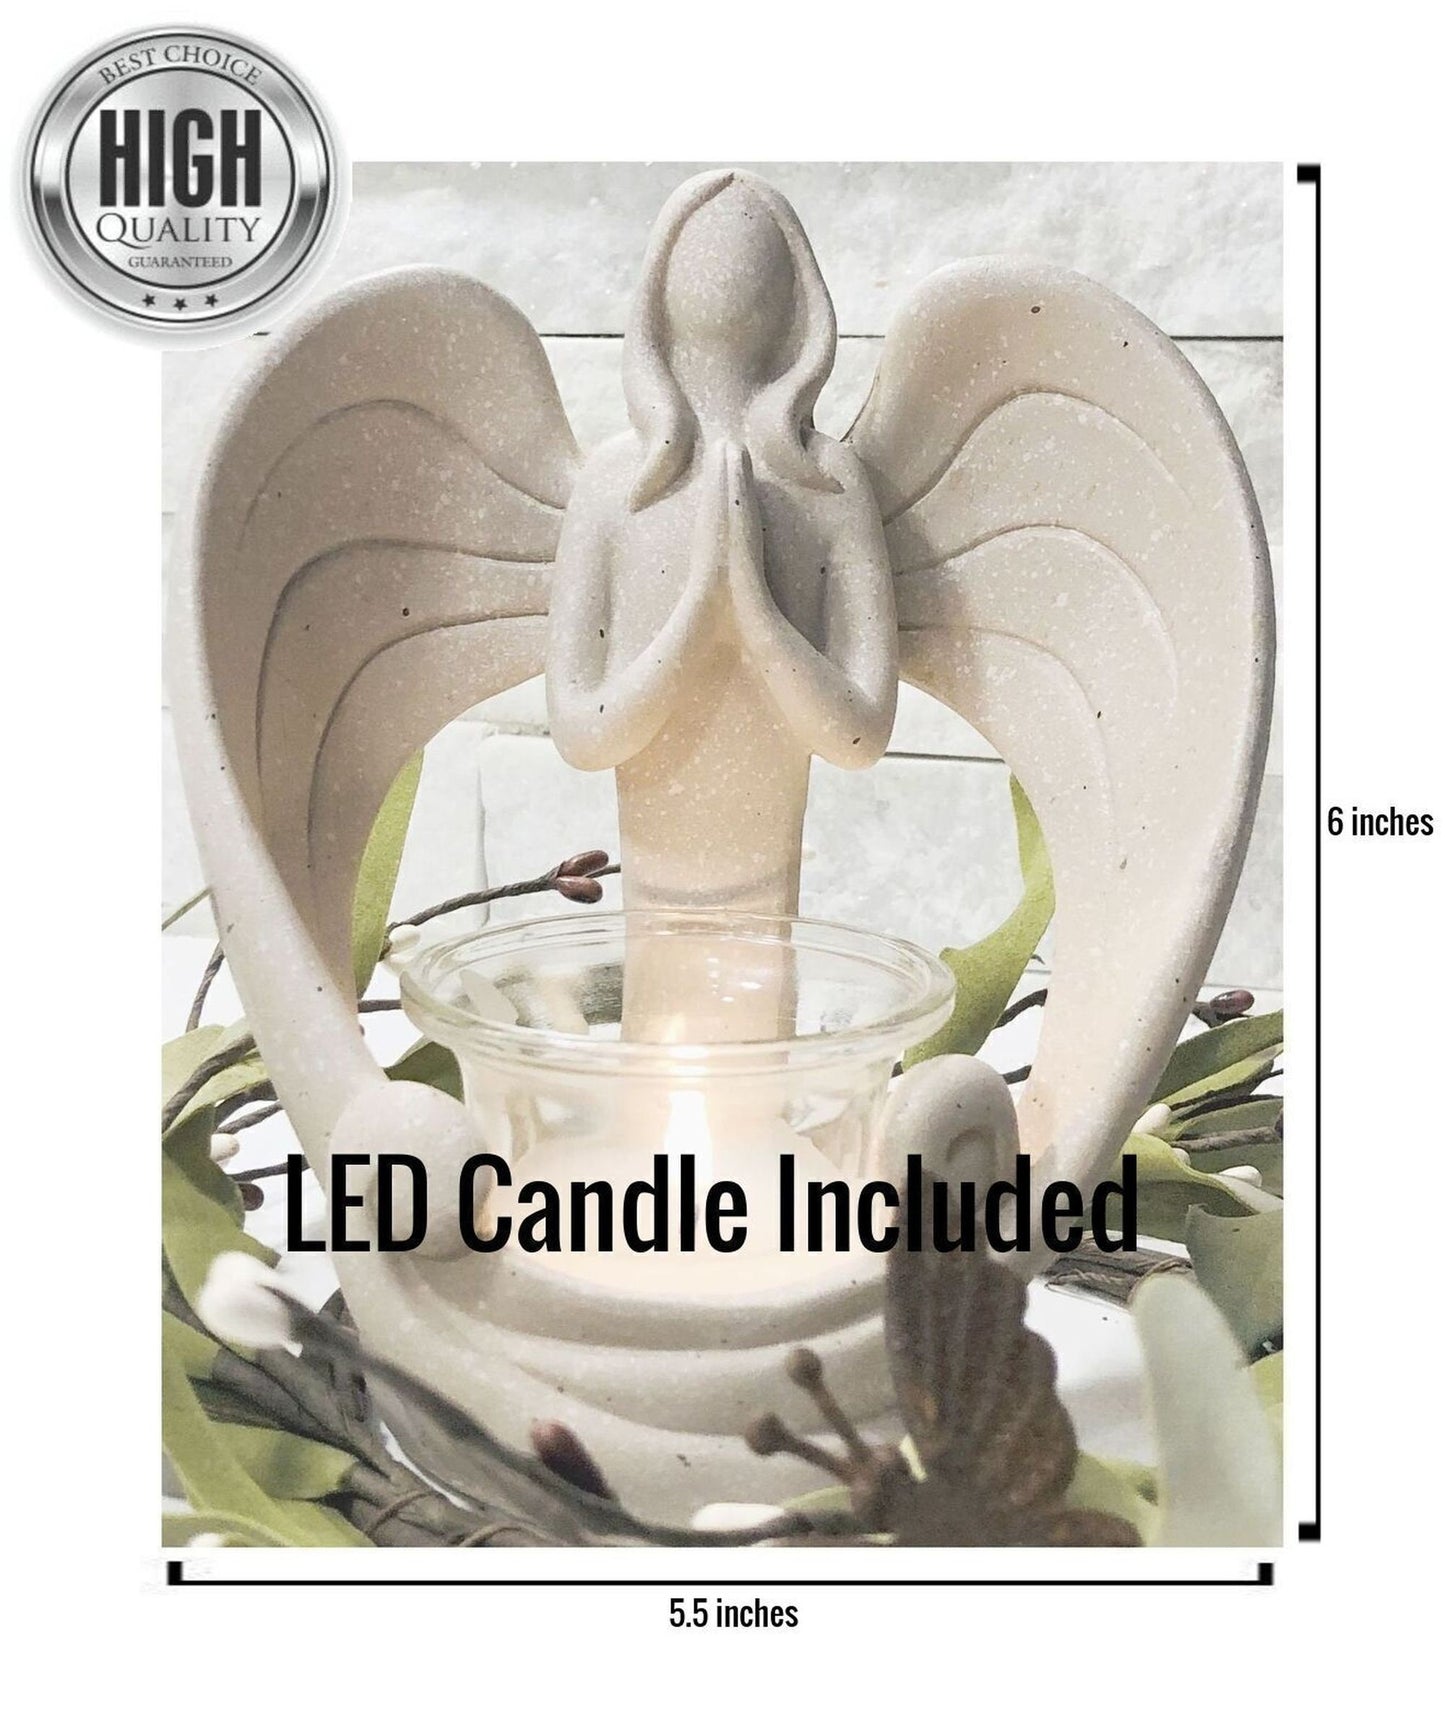 Angel Candleholder Statue for Mother's Day, "Angel Mother" Card and Refrigerator Magnet, Gift Boxed